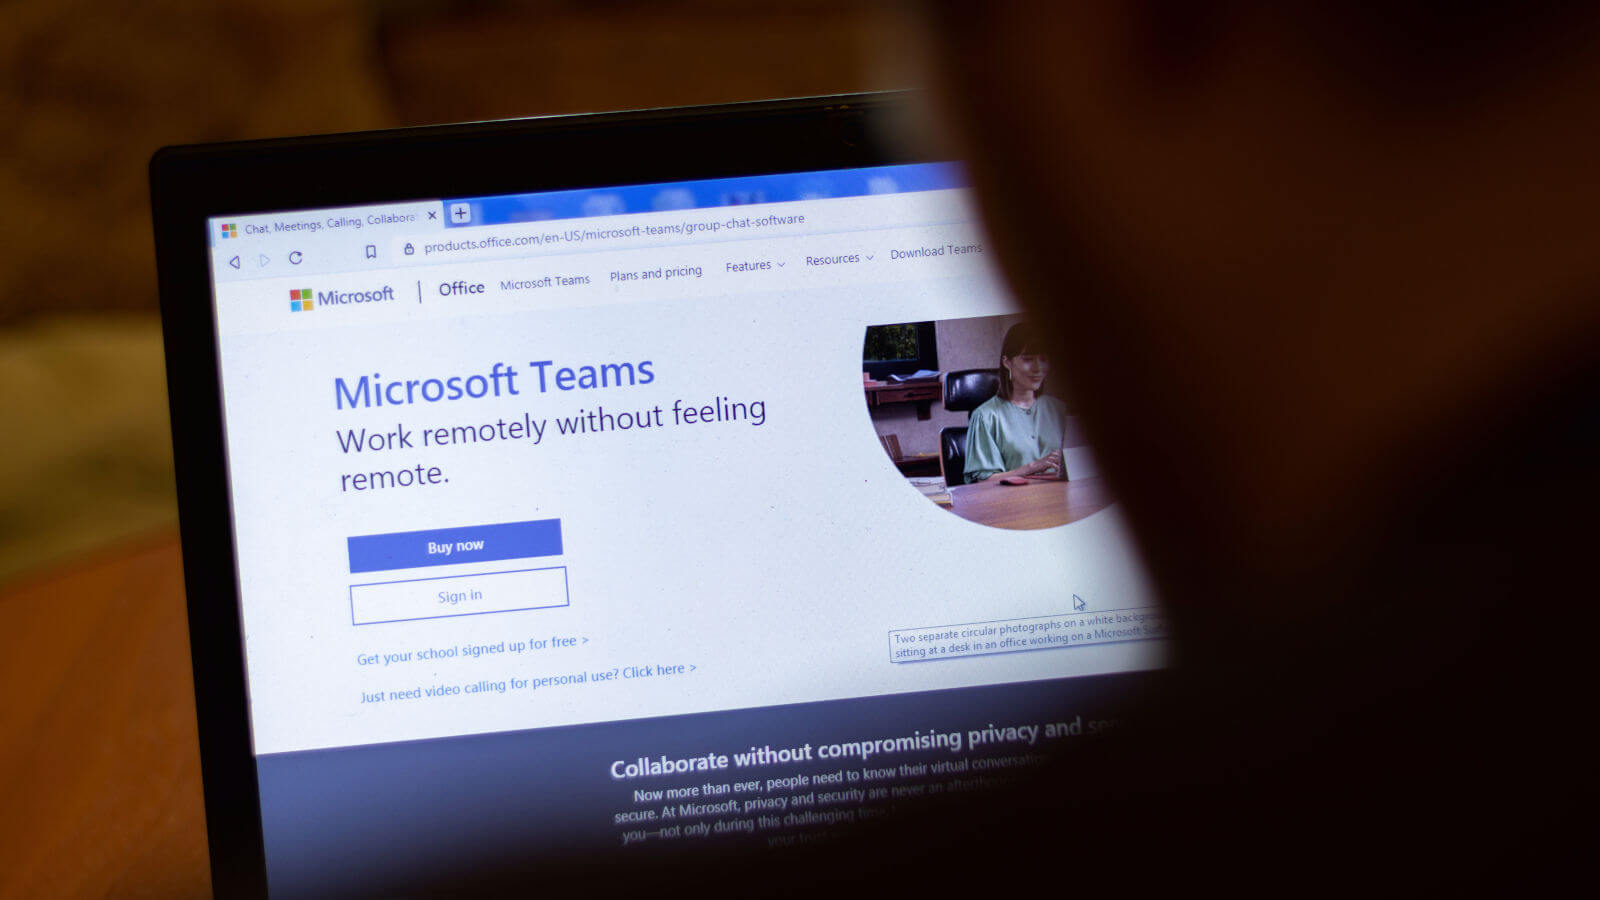 Microsoft Teams vulnerability was found in the online collaboration